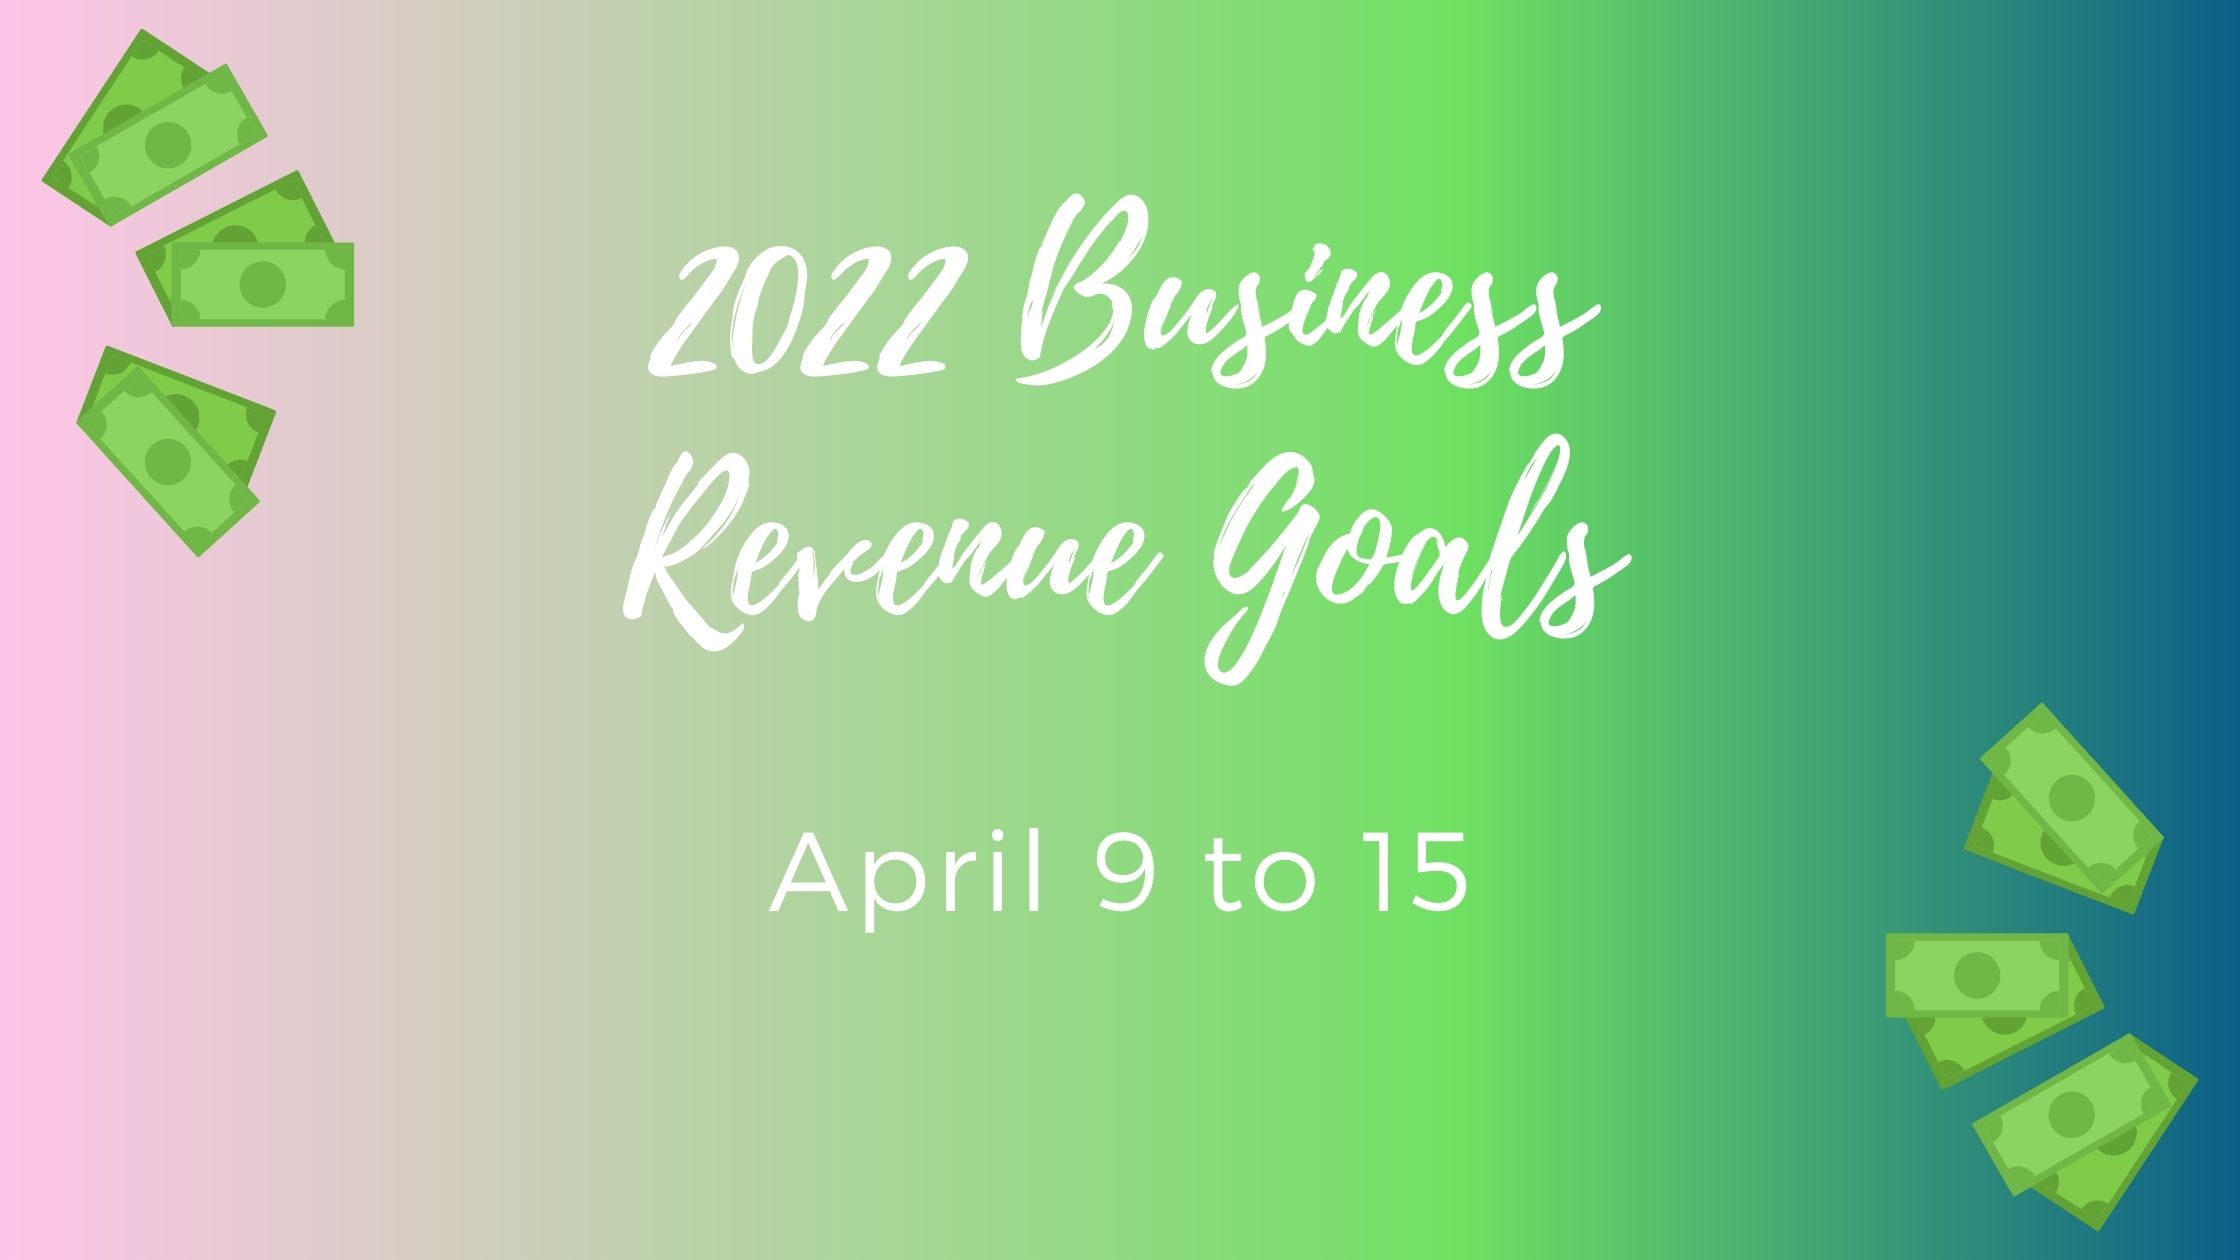 Business Goal Tracking for Week 15 of 2022